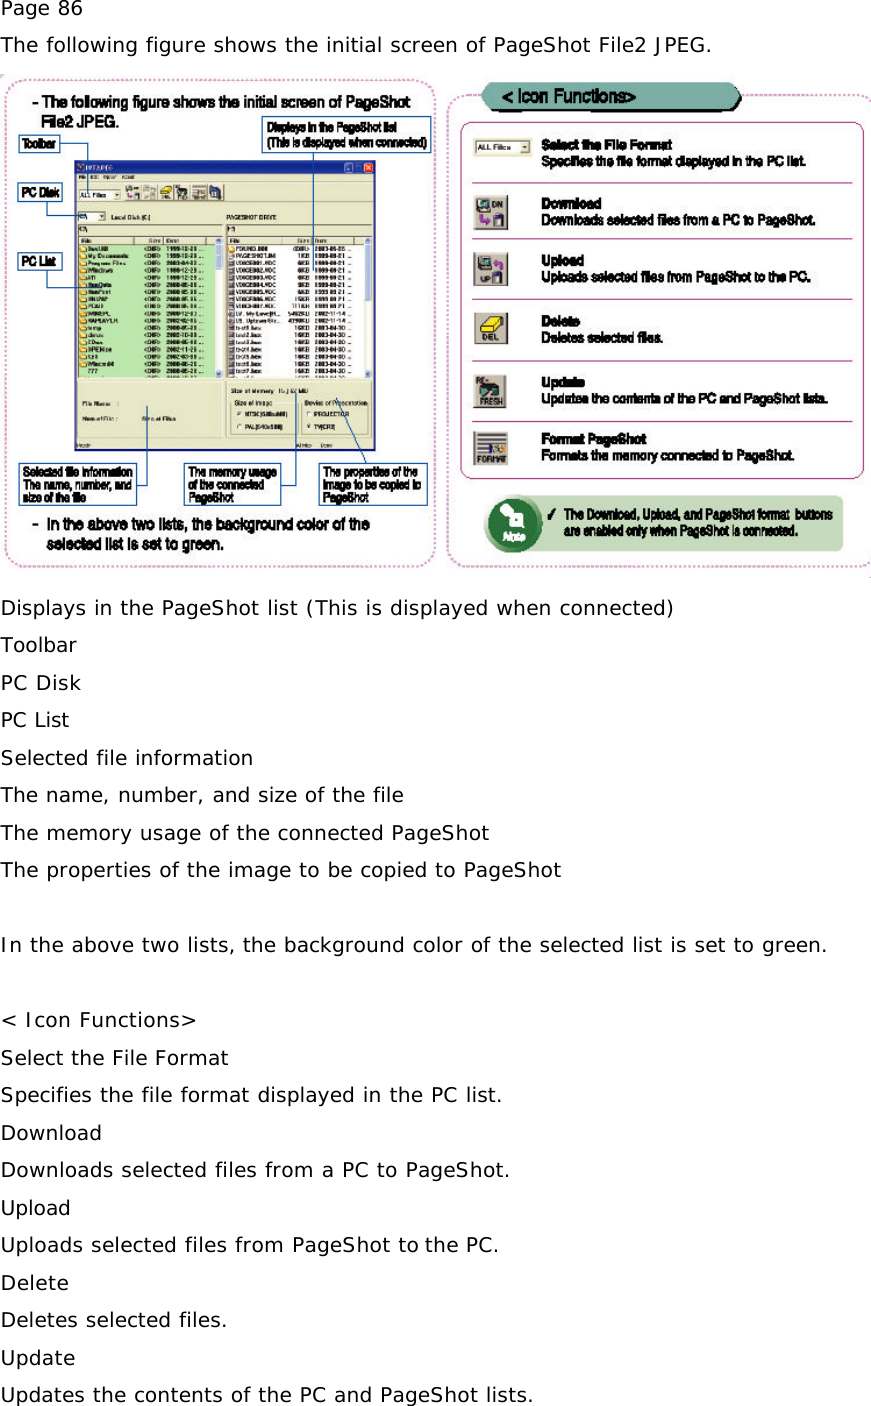 Page 86 The following figure shows the initial screen of PageShot File2 JPEG.  Displays in the PageShot list (This is displayed when connected) Toolbar PC Disk PC List Selected file information The name, number, and size of the file The memory usage of the connected PageShot The properties of the image to be copied to PageShot  In the above two lists, the background color of the selected list is set to green.  &lt; Icon Functions&gt; Select the File Format Specifies the file format displayed in the PC list. Download Downloads selected files from a PC to PageShot. Upload Uploads selected files from PageShot to the PC. Delete Deletes selected files. Update Updates the contents of the PC and PageShot lists. 